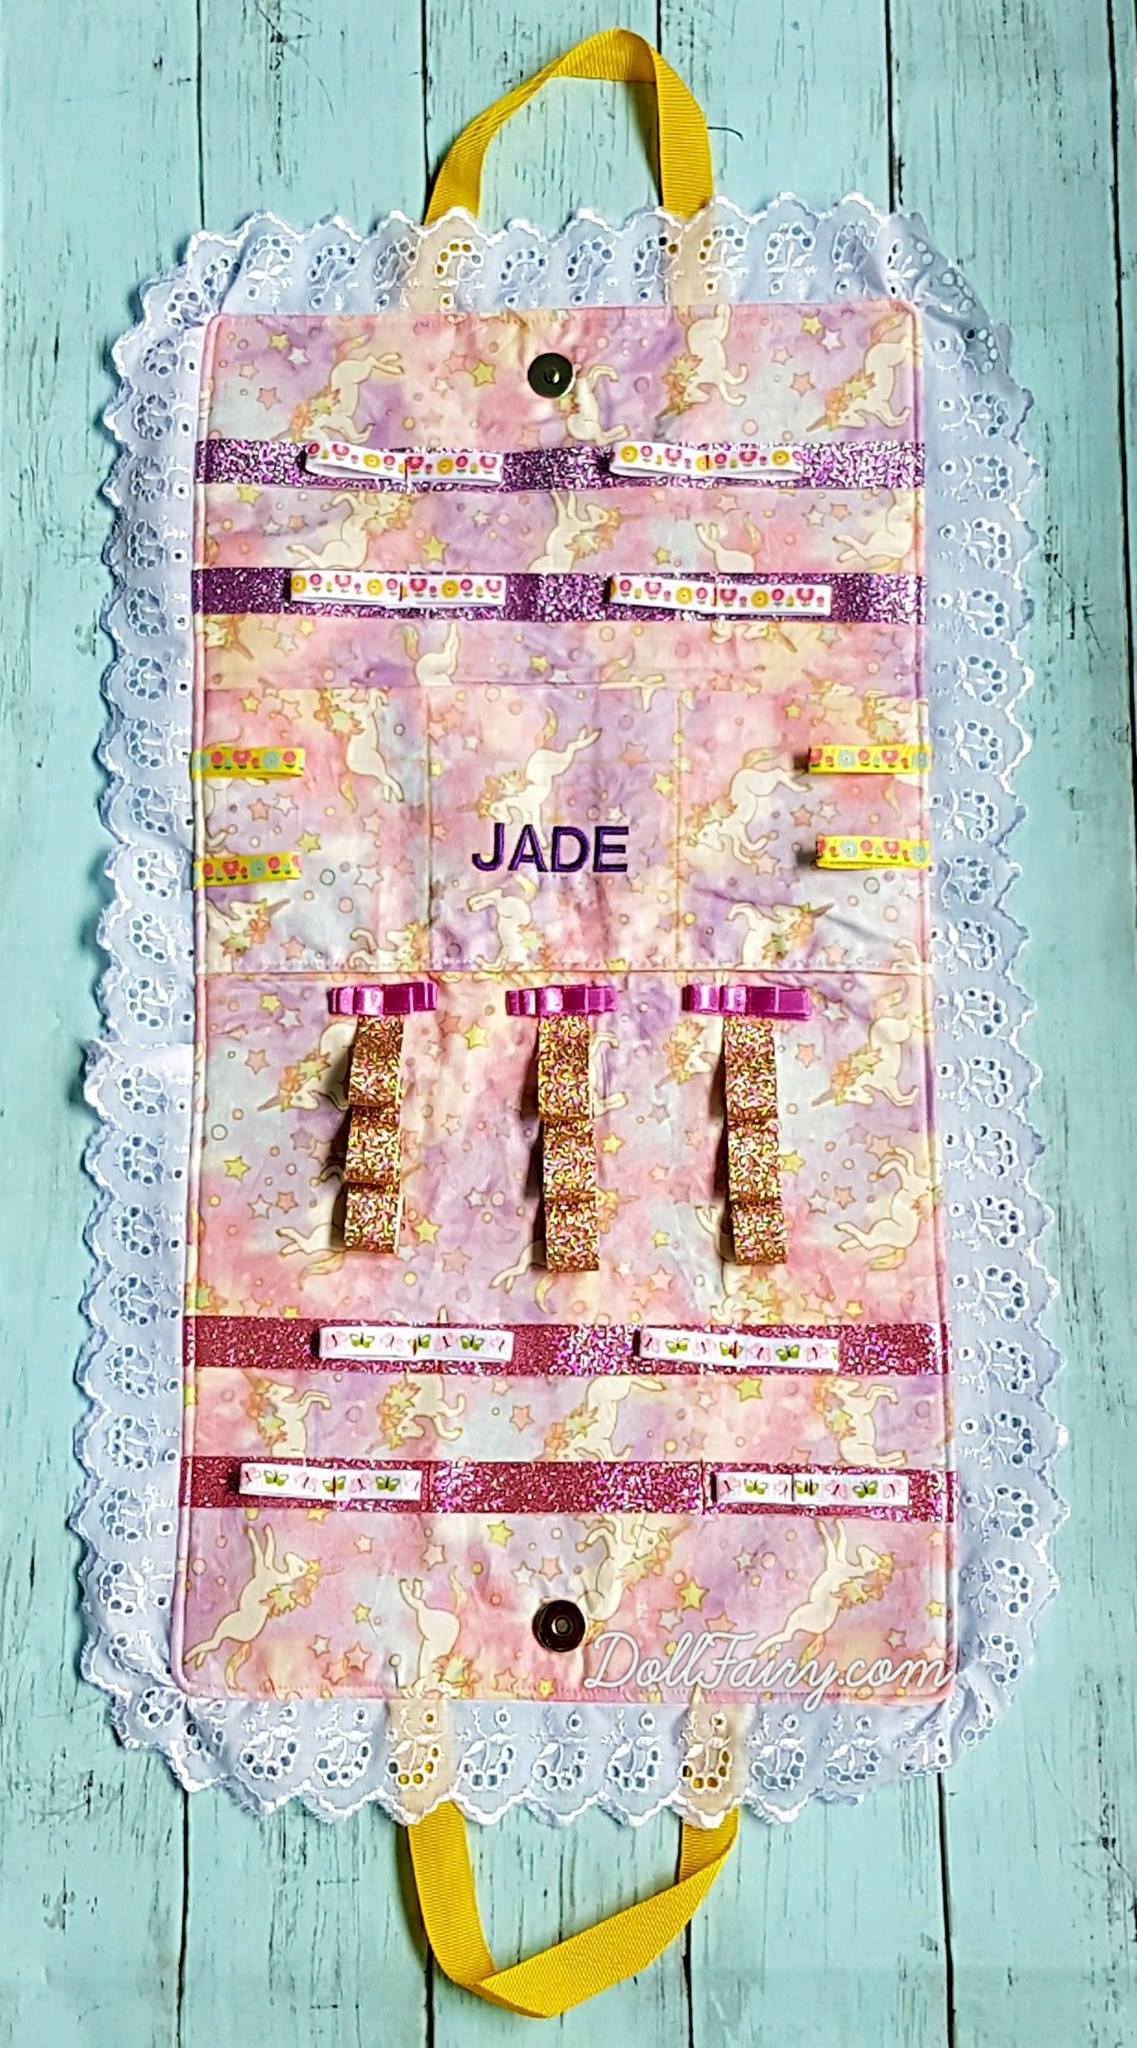 Hair Accessories Organizer with Personalised Name For Jade